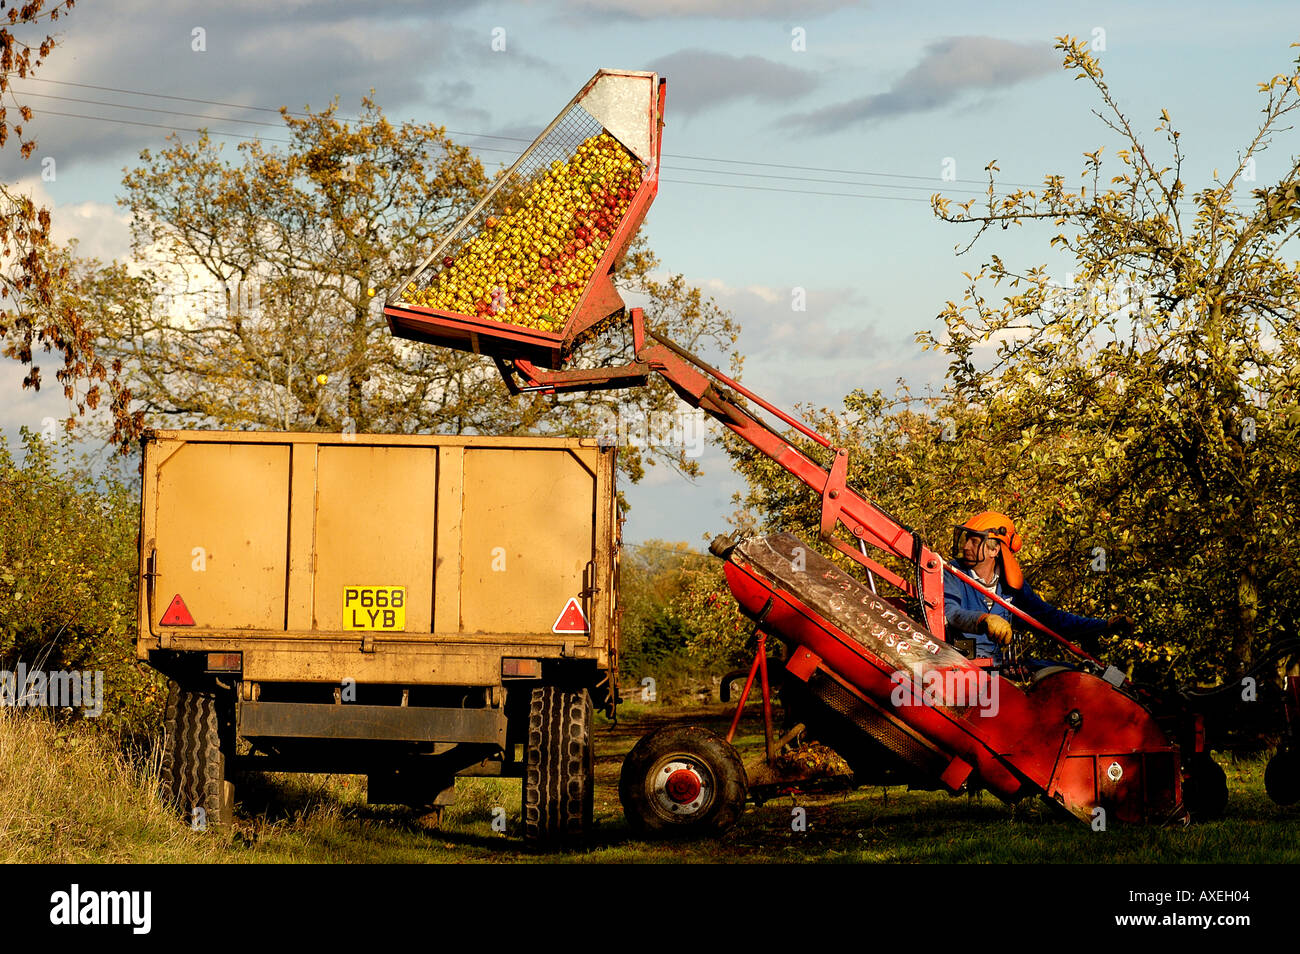 Collecting fallen cider apples Stewley Orchard near Taunton Somerset England Stock Photo